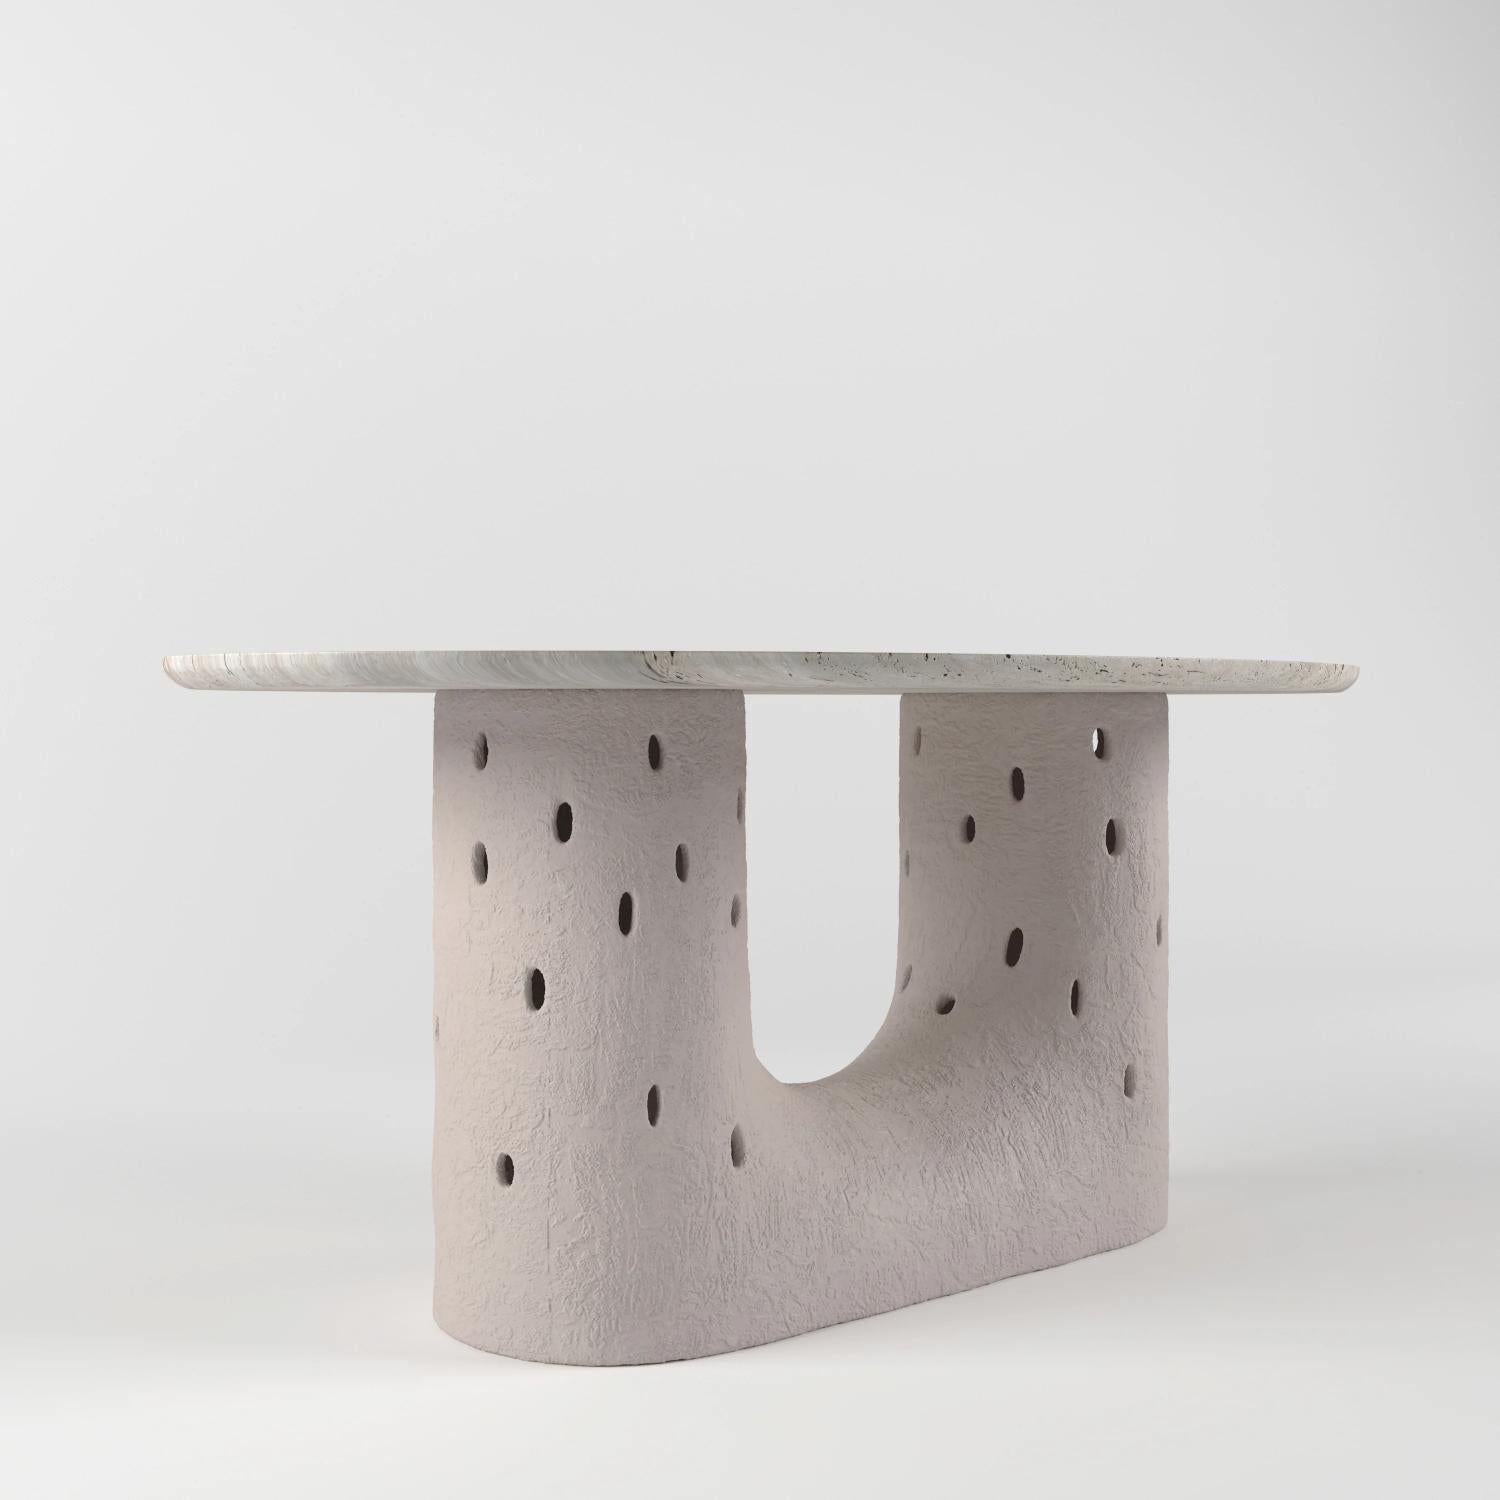 Ztista oval table by Faina
Design: Victoriya Yakusha.
Dimensions: W 170 x D 110 cm x H 74 cm
Material: Upcycled steel frame and live ZTISTA Material - a blend of cellulose, clay, flax fiber wood chips, biopolymer cover. Wooden table top / ash.